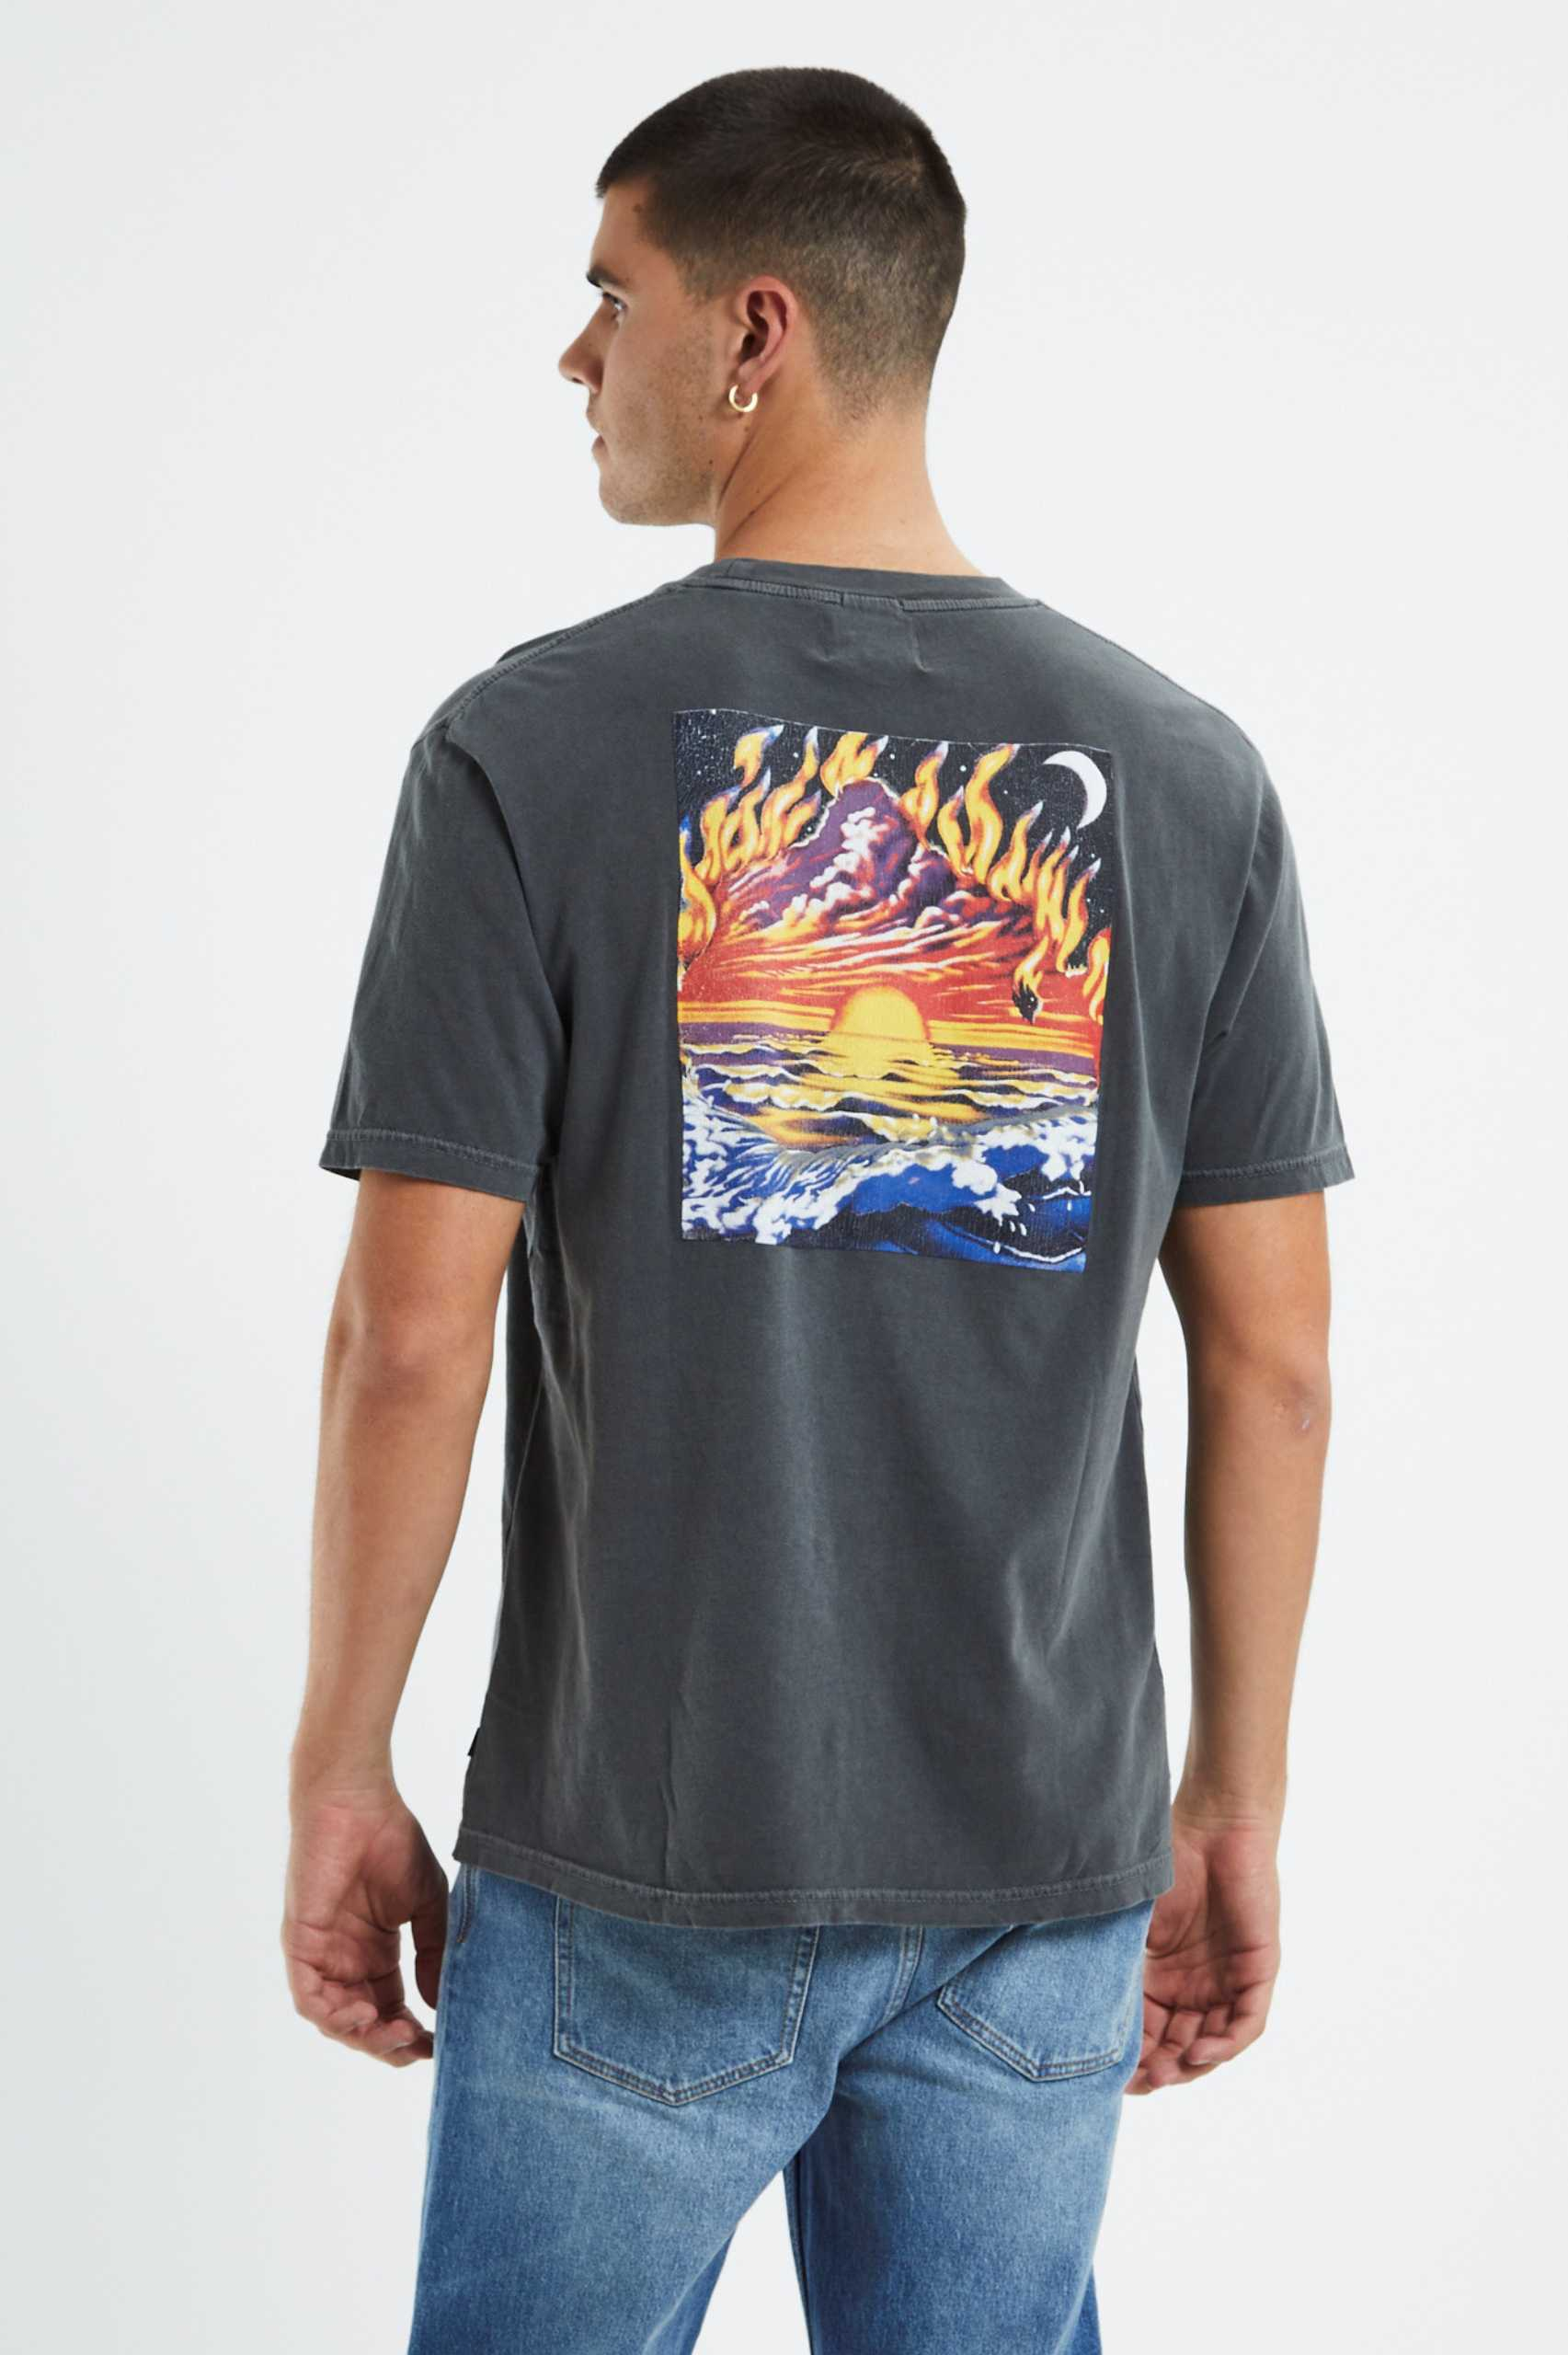 Rolla's Red Hot Summer Tee in Washed Black